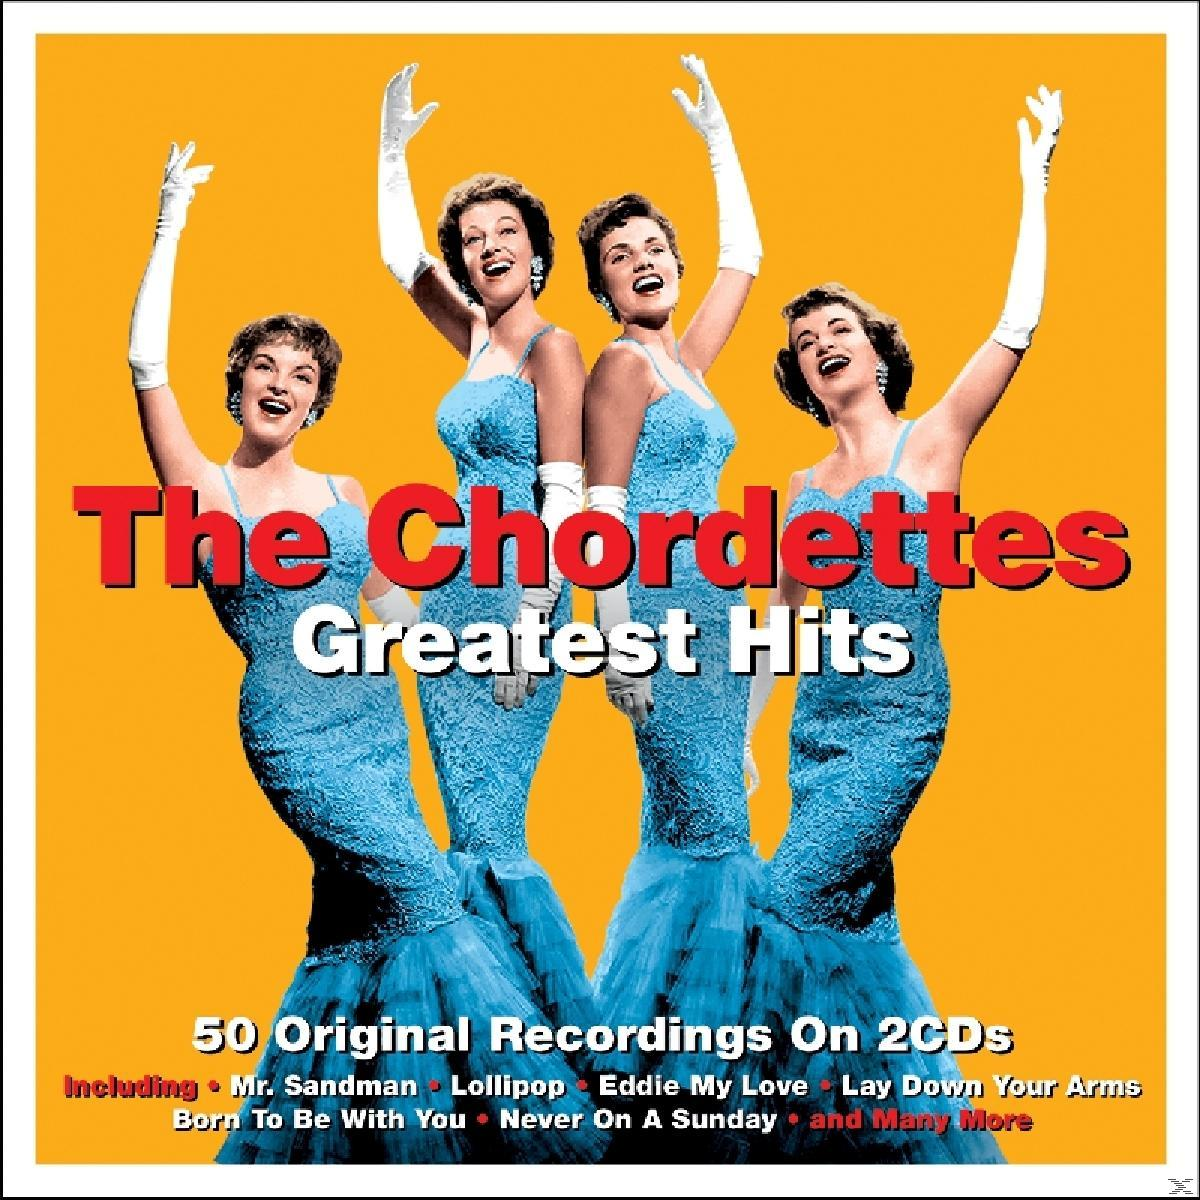 The - - (CD) Hits Greatest Chordettes